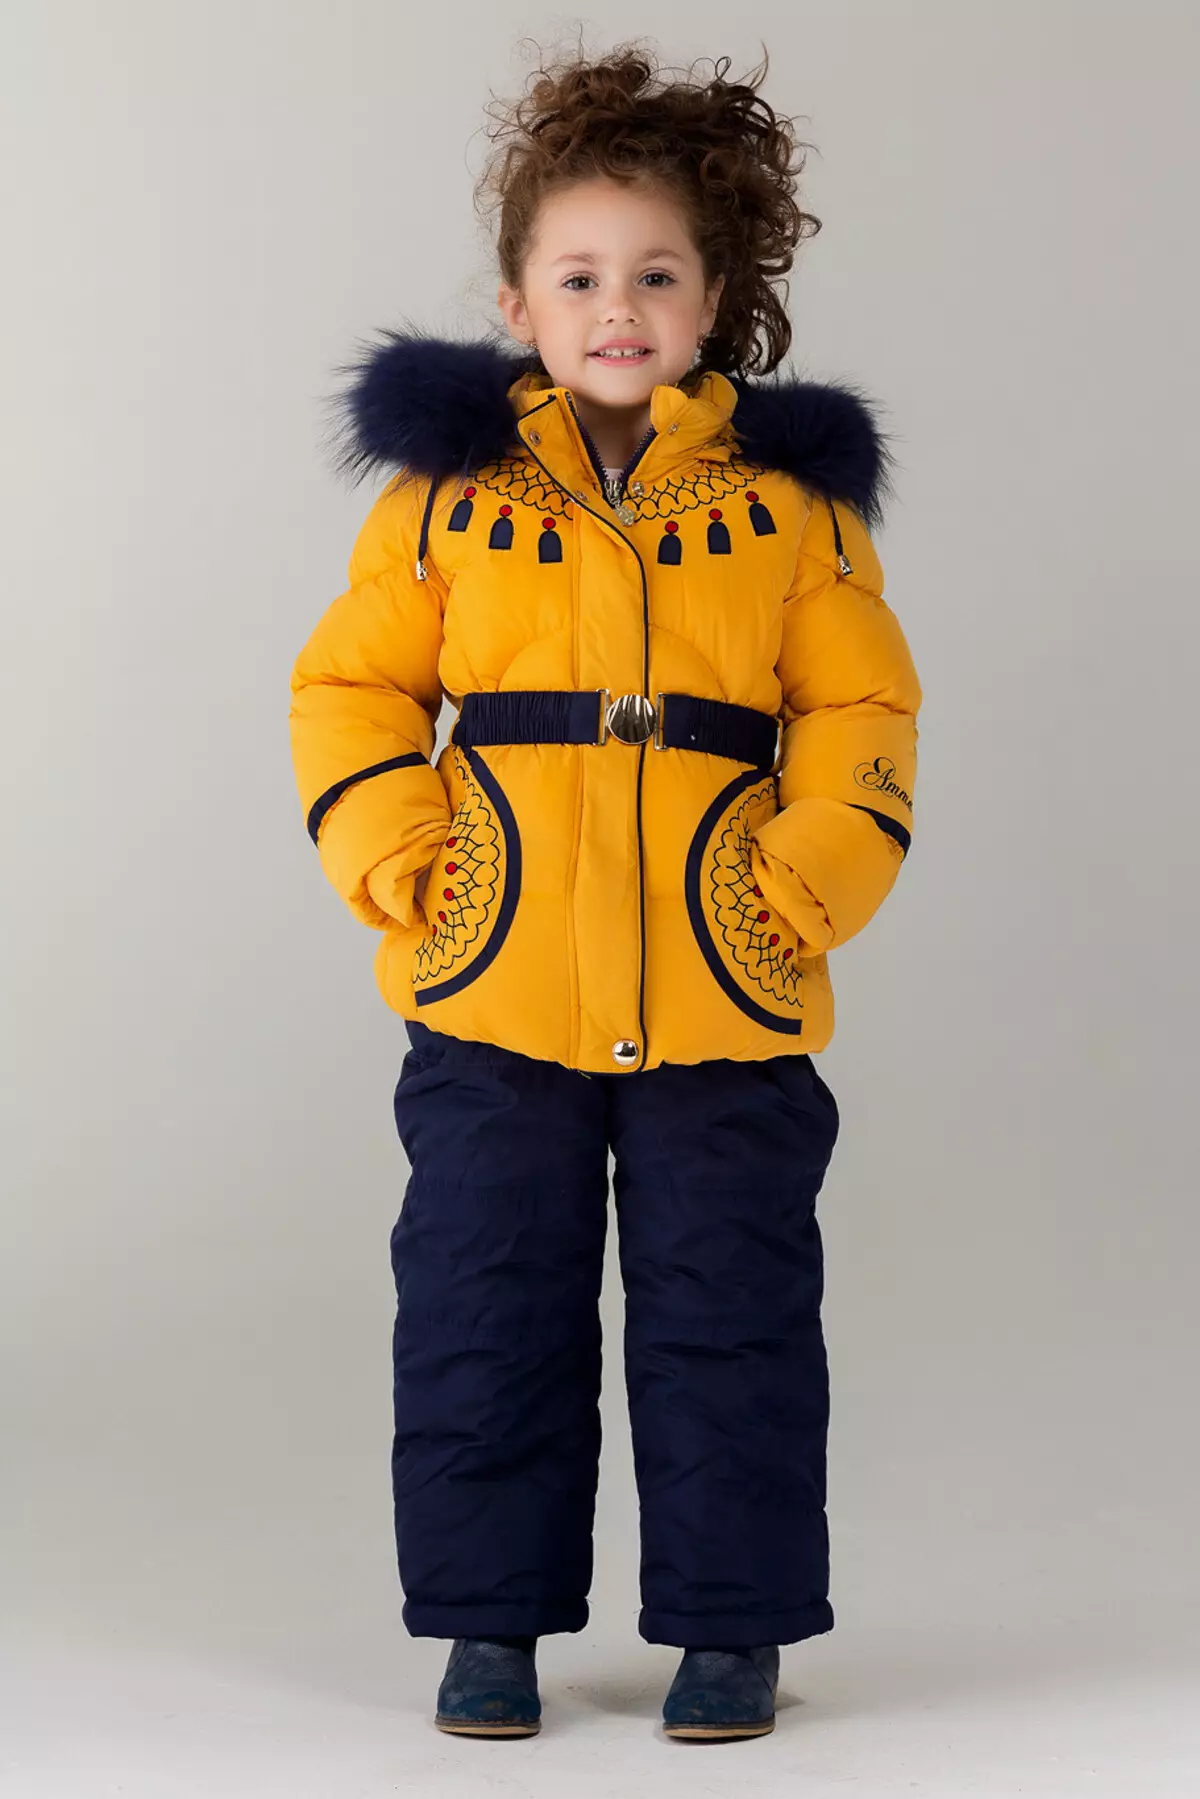 Bilemi (38 photos): Children's clothing, winter kits and overalls, raincoat and jackets, brand reviews 3802_15